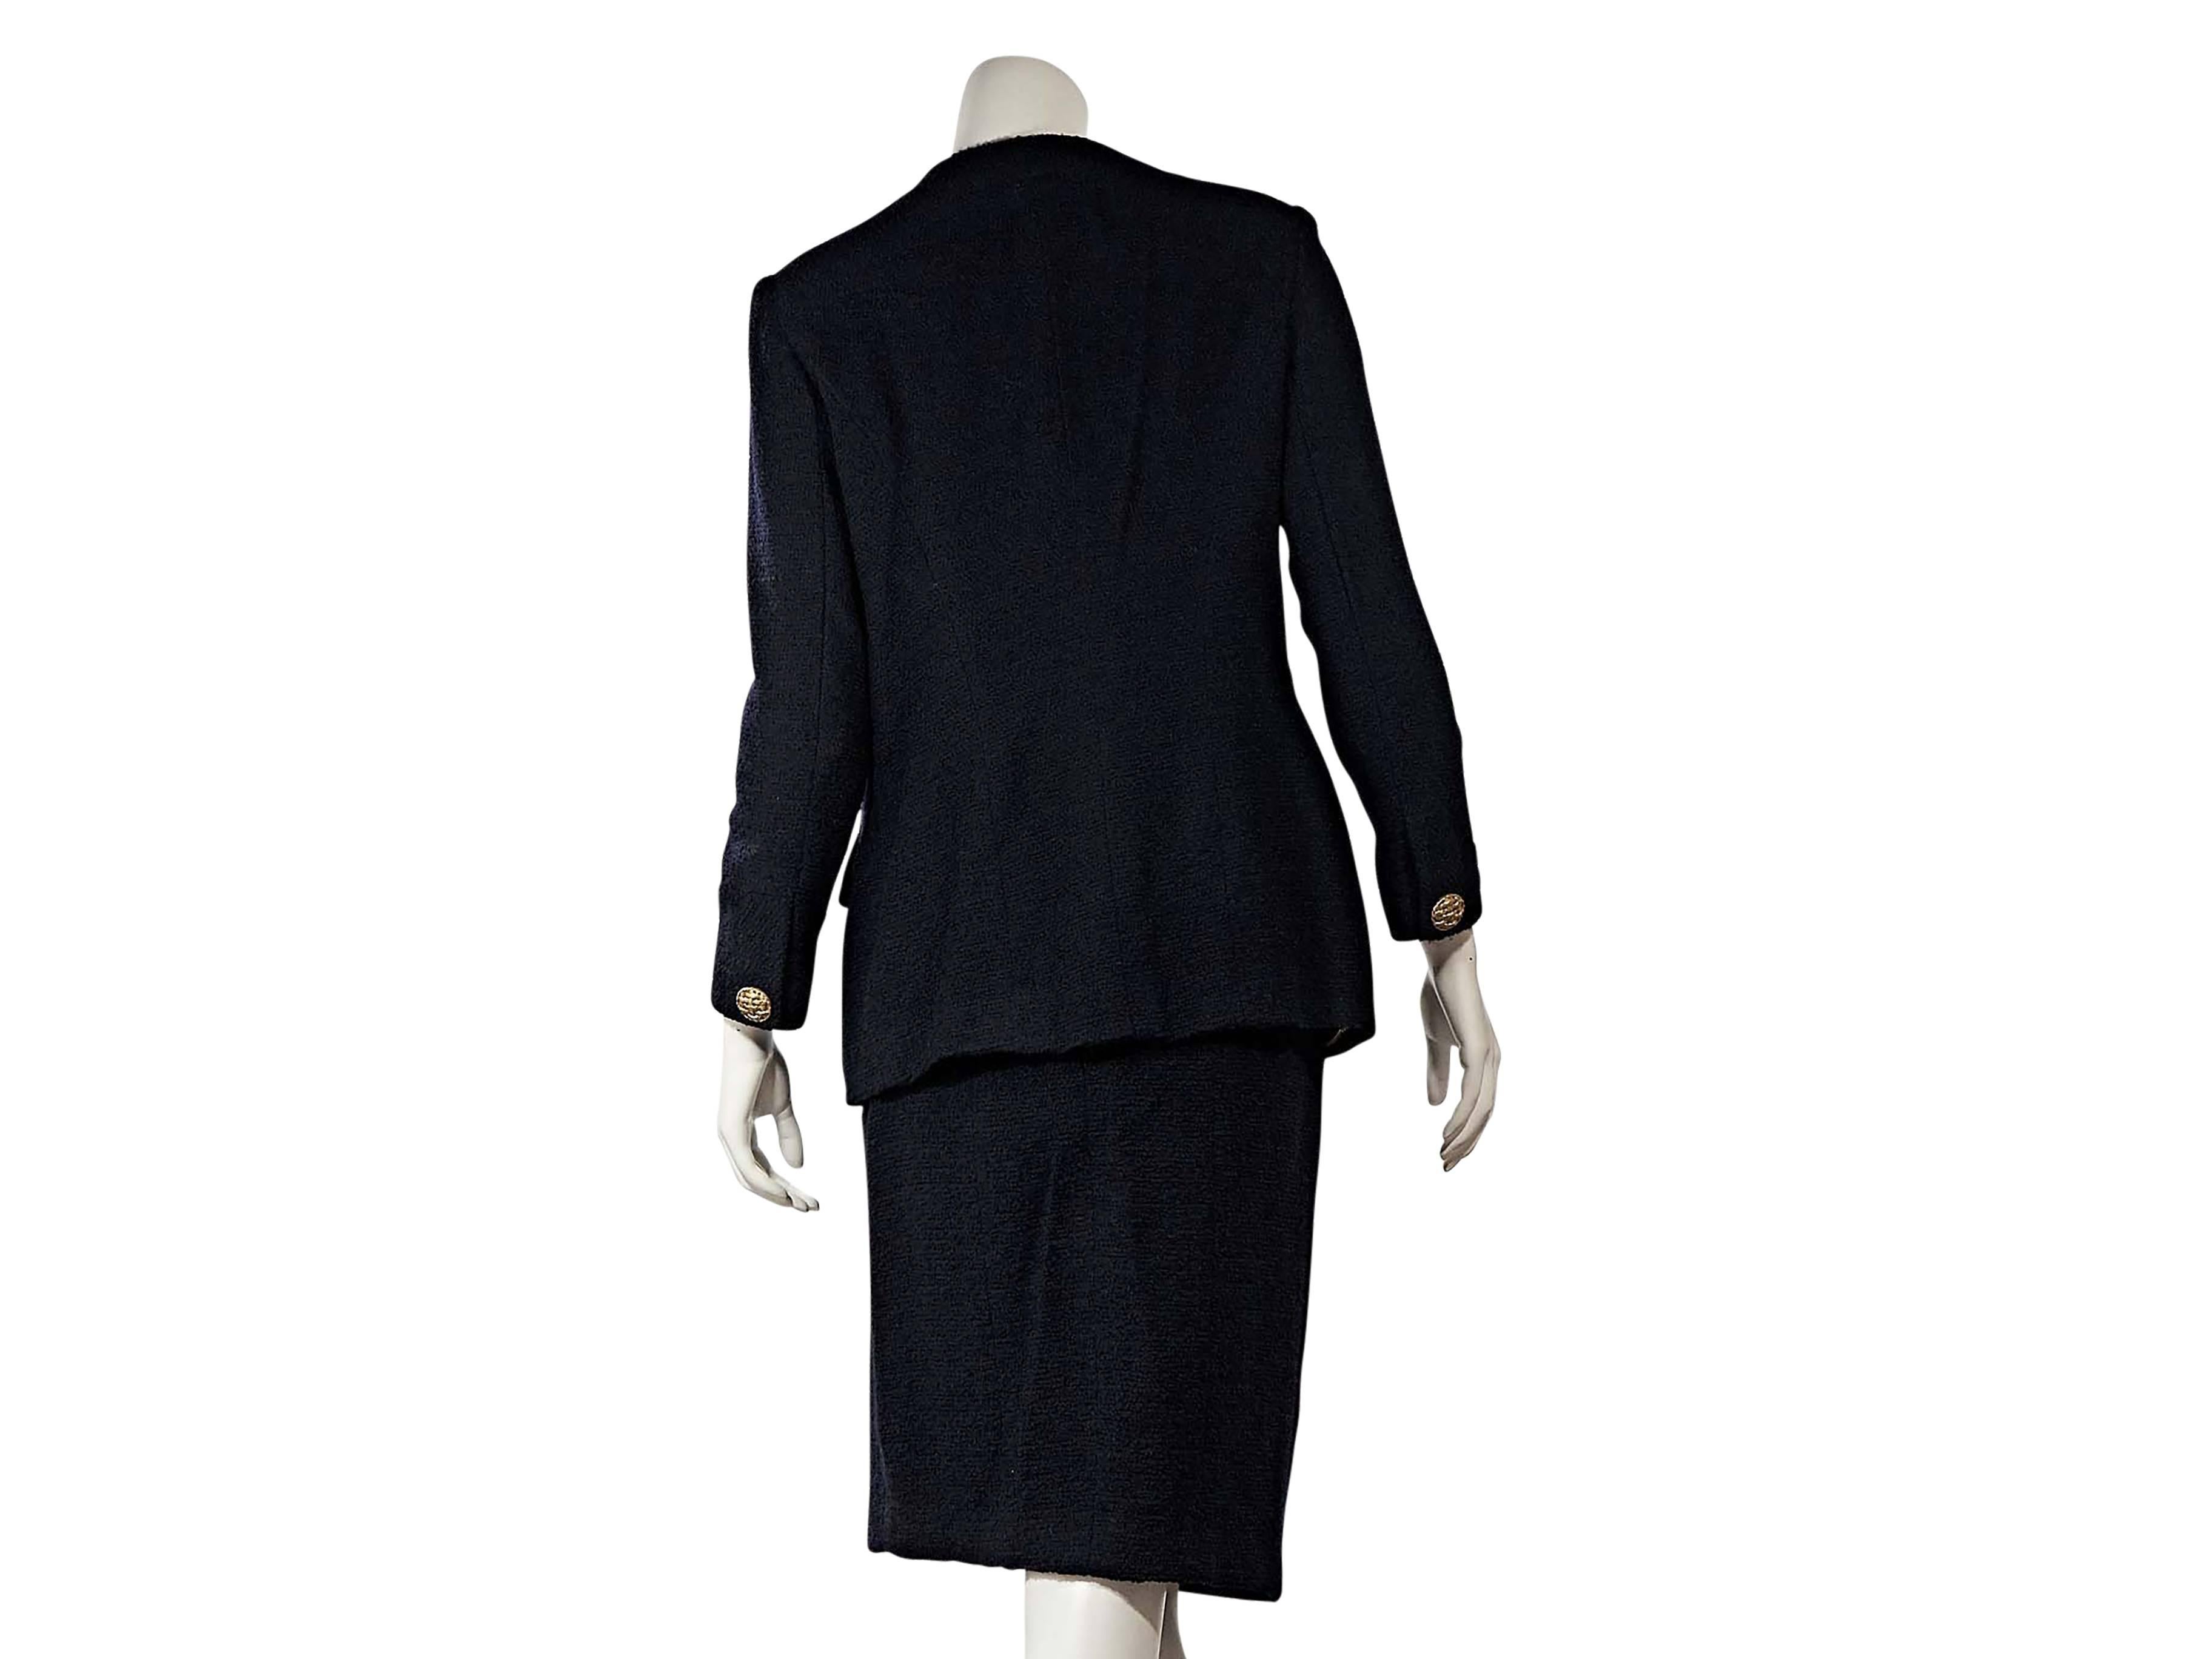 Product details: Vintage navy skirt suit set by Chanel. Crewneck. Bracelet-length sleeves. Button cuffs and front. Flap pockets. Matching pencil skirt. Banded waist. 
Condition: Very good. 

